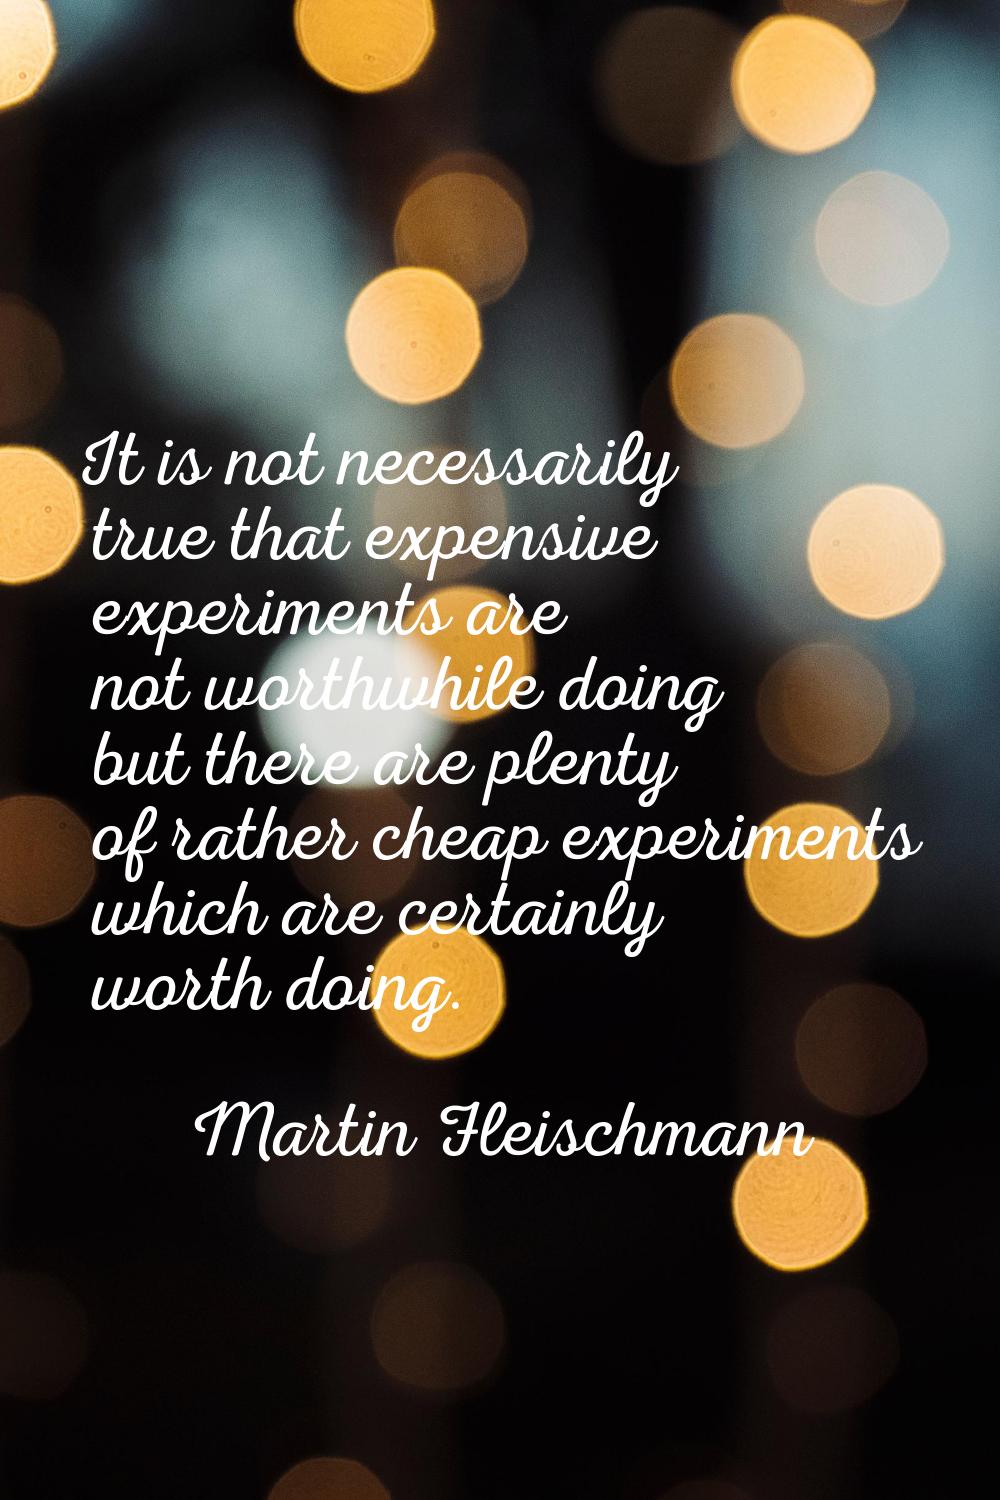 It is not necessarily true that expensive experiments are not worthwhile doing but there are plenty